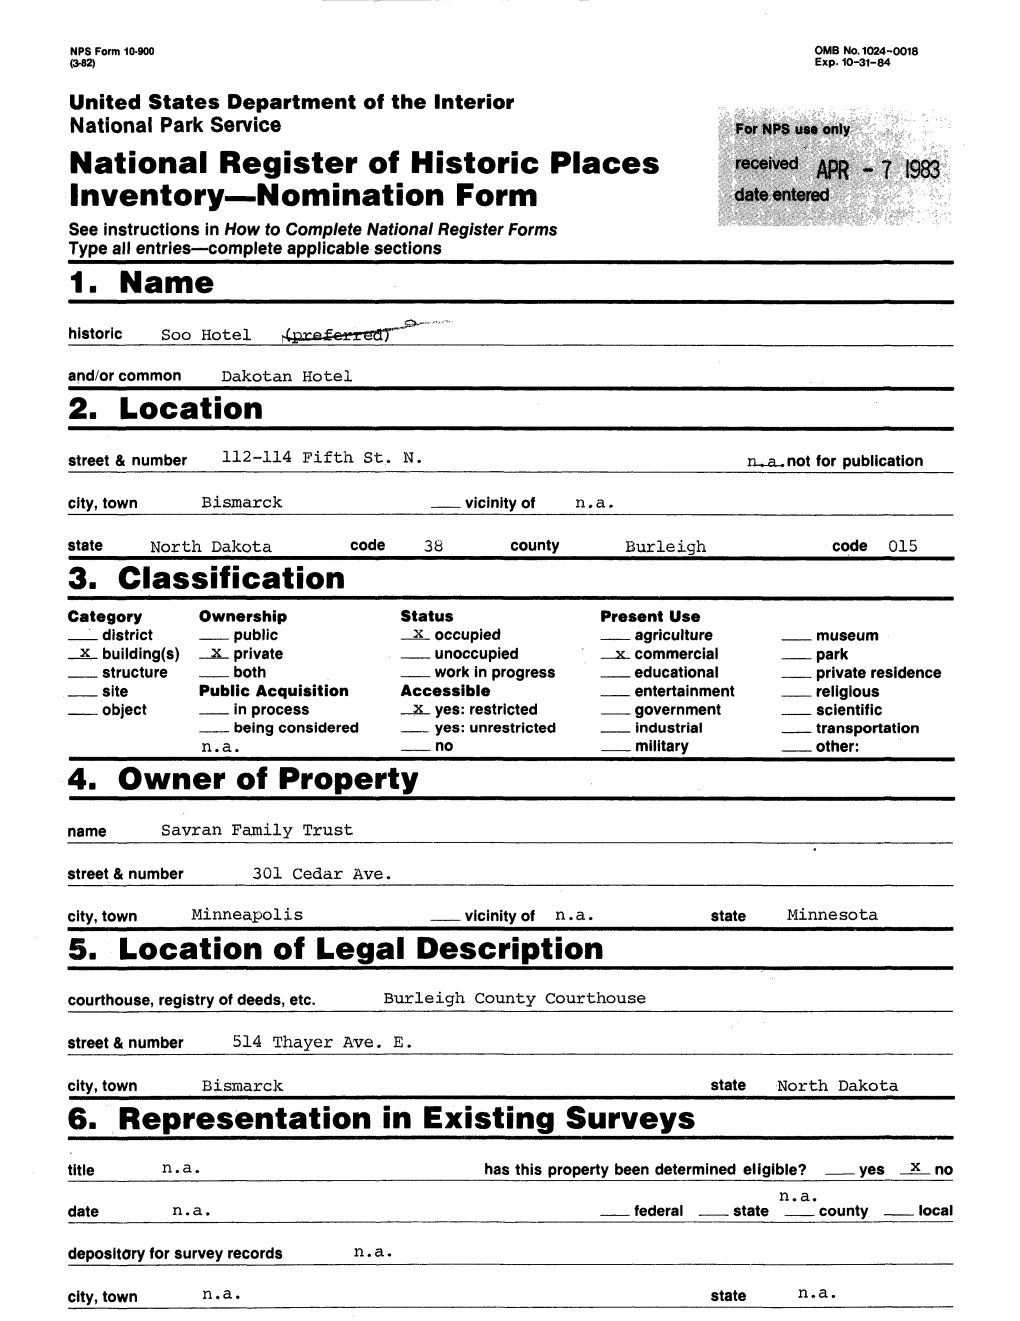 3. Classification 4. Owner of Property